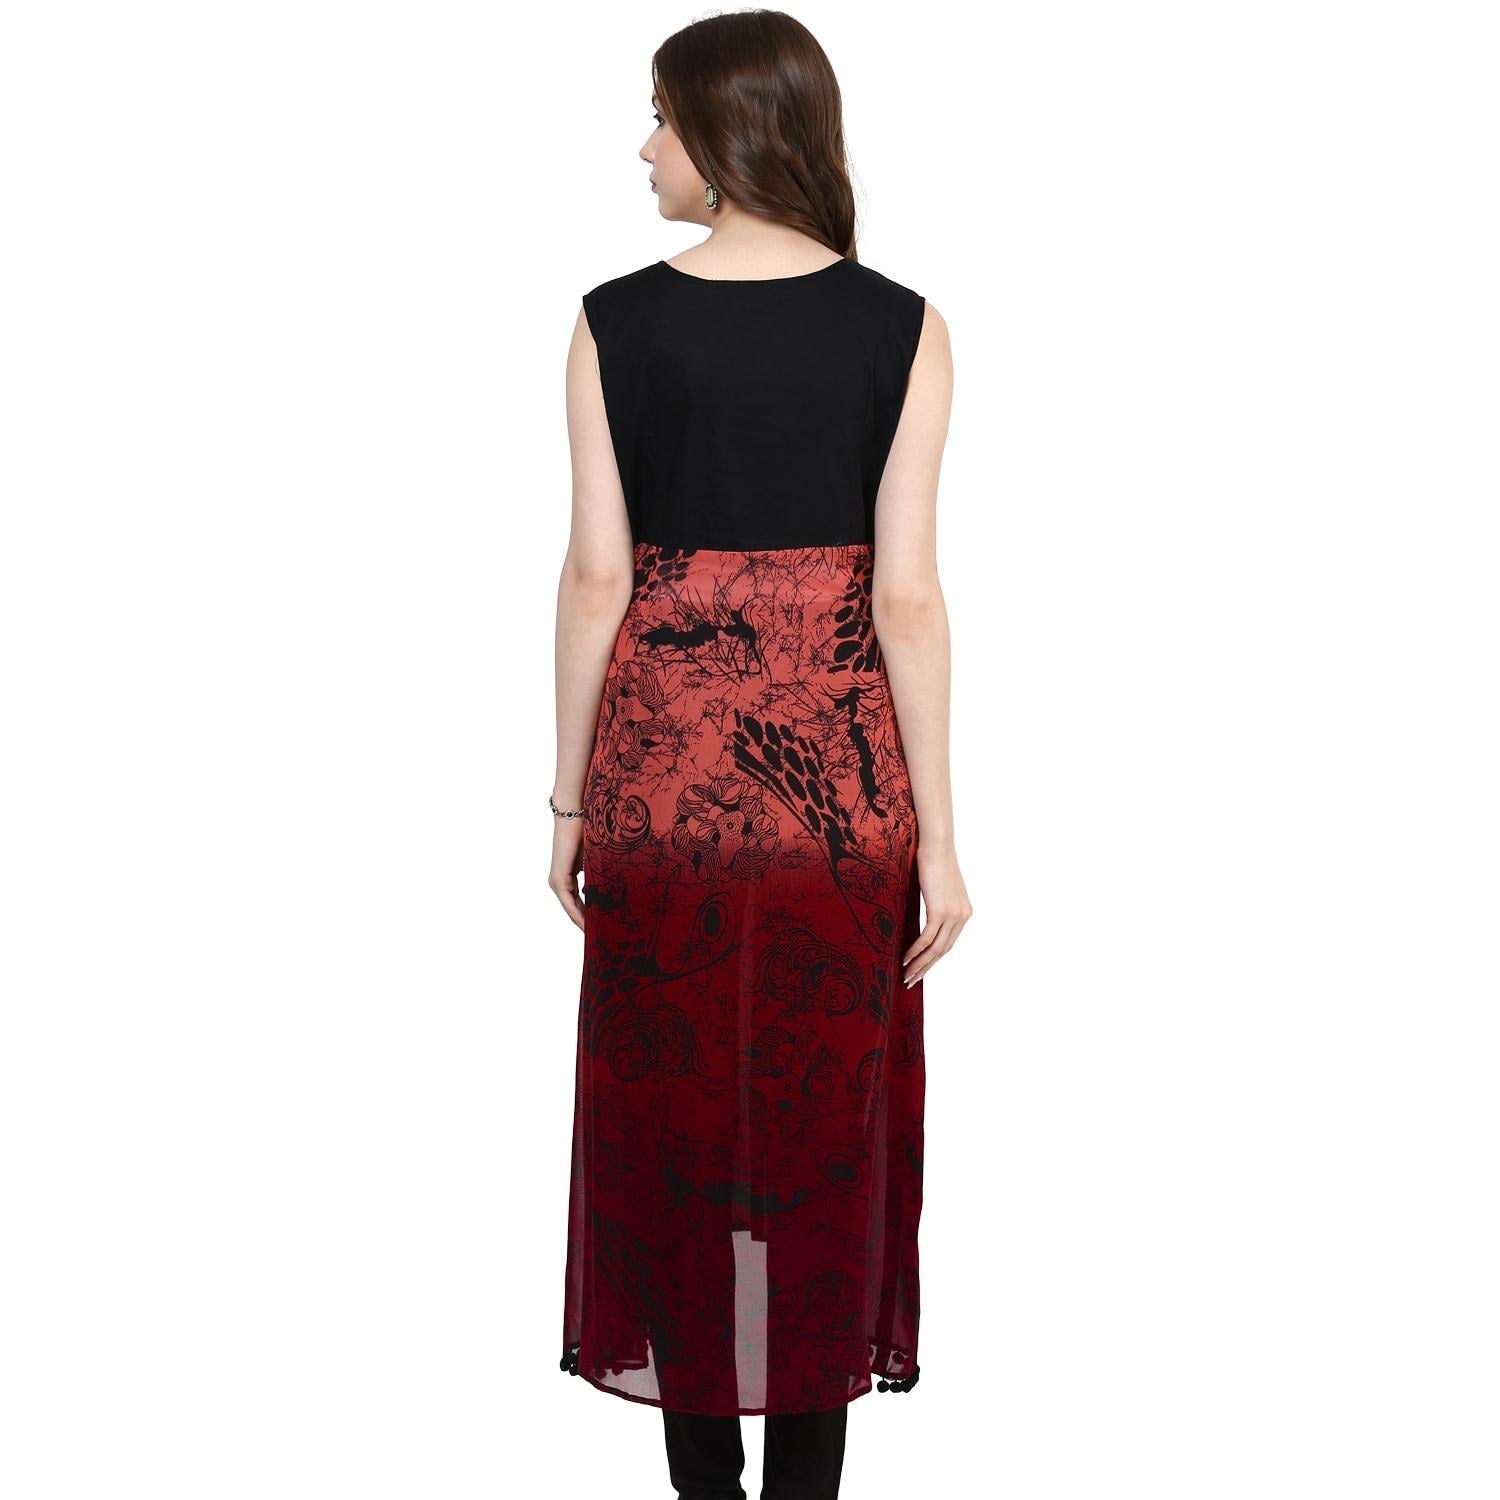 Women's Abstract Print Ankle Length Kurti - Pannkh